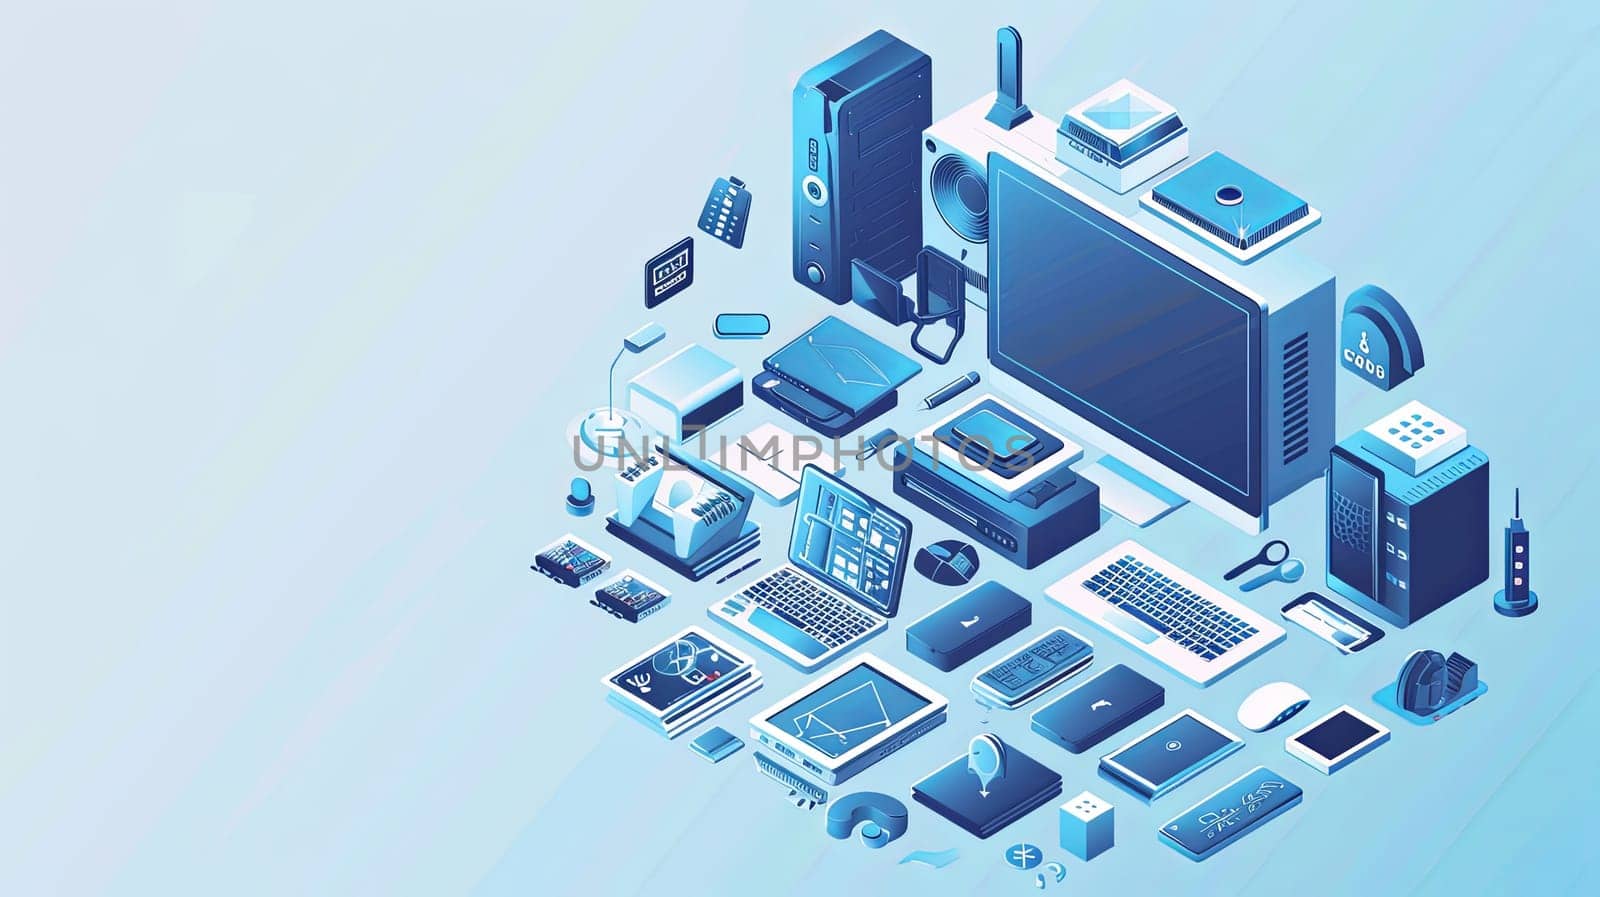 Various electronic devices laid out on a blue background, including computers, laptops, and liaisons. Ideal for computer service and tech repair concepts.